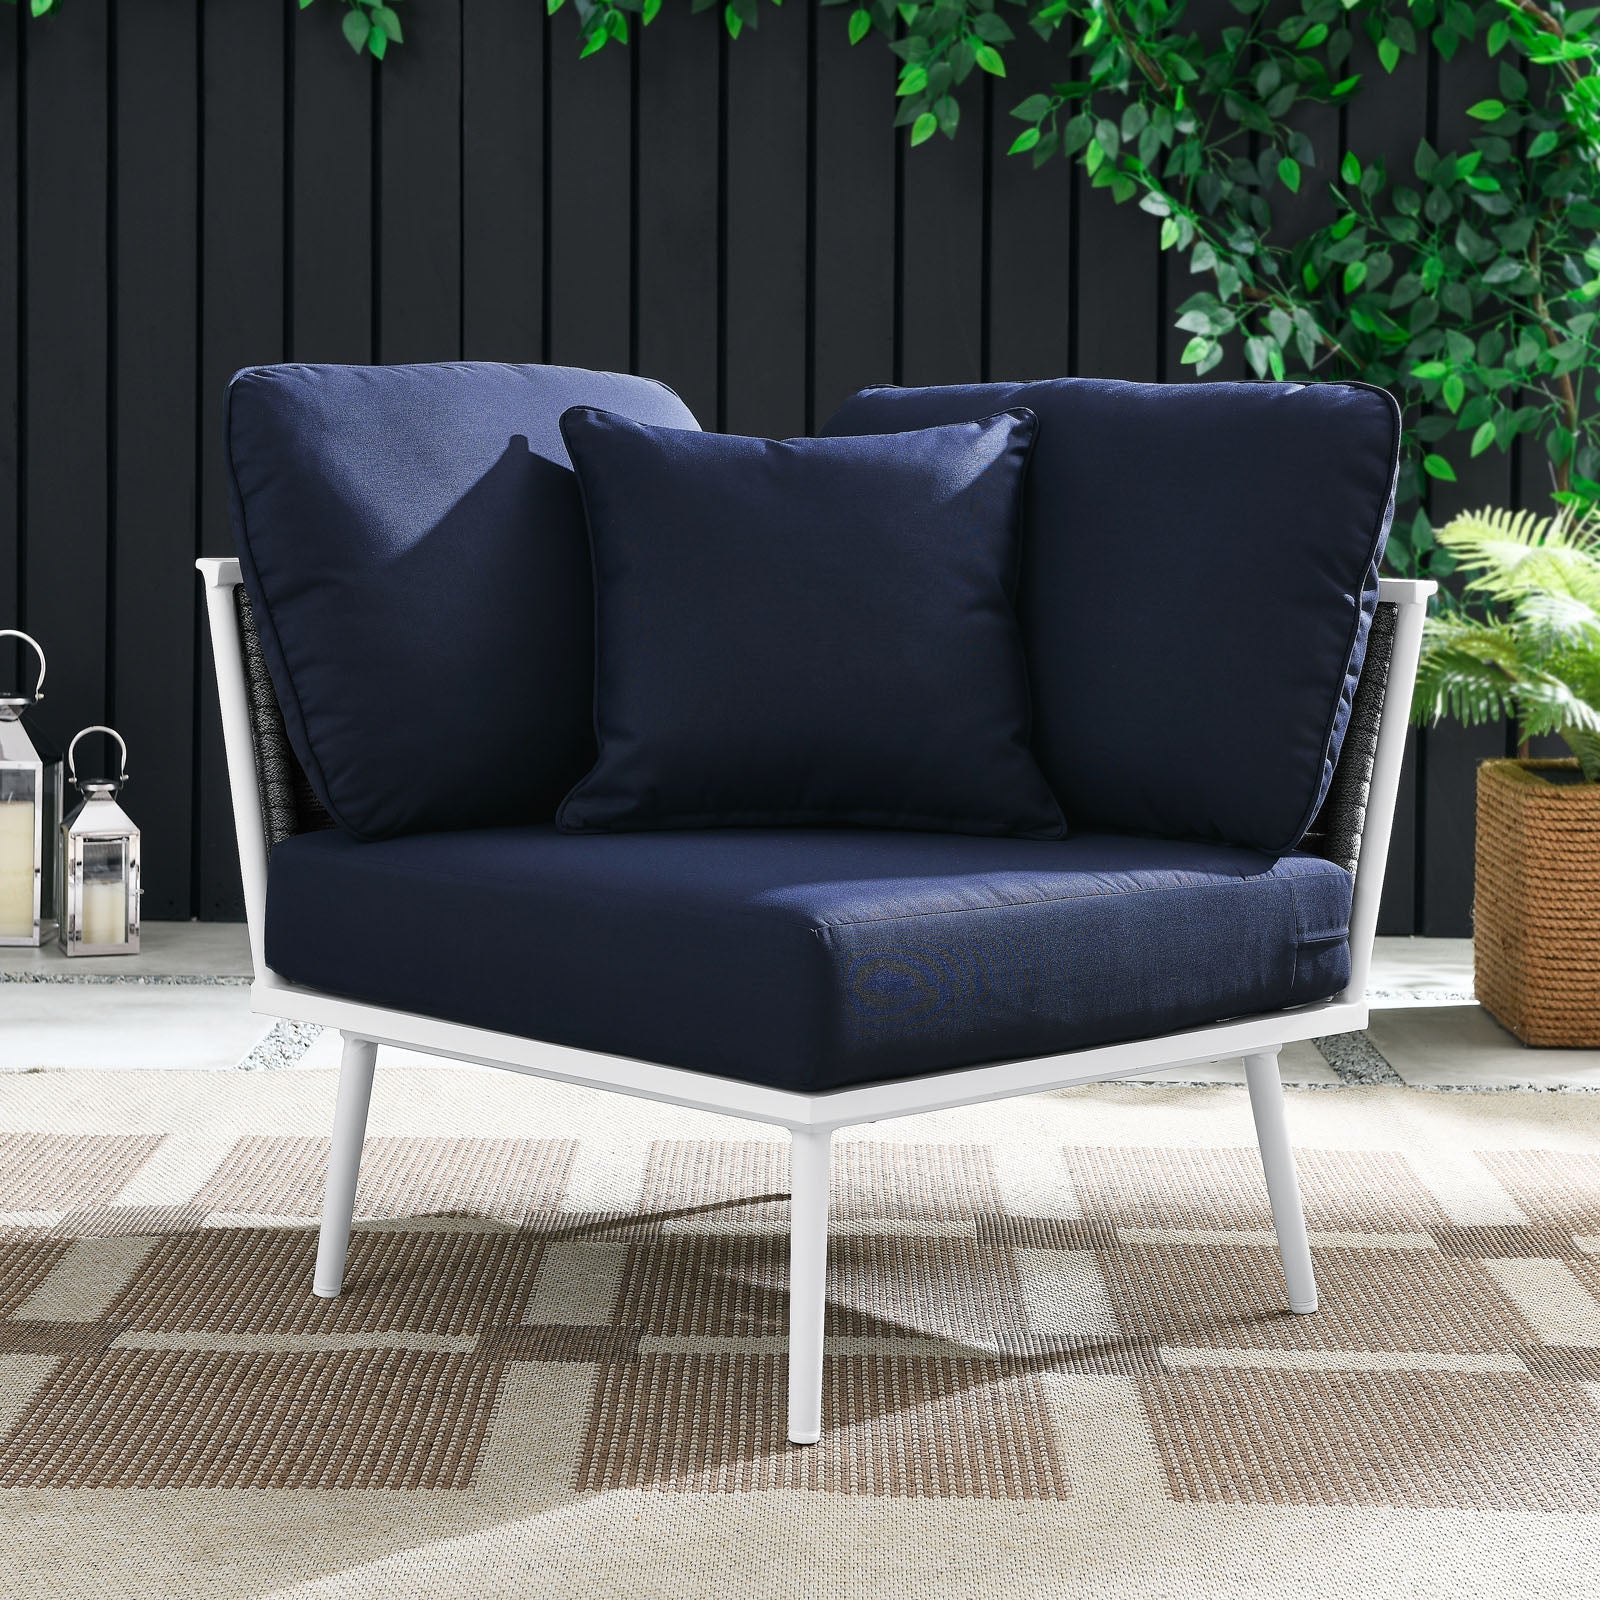 Stance Outdoor Patio Aluminum Corner Chair - East Shore Modern Home Furnishings